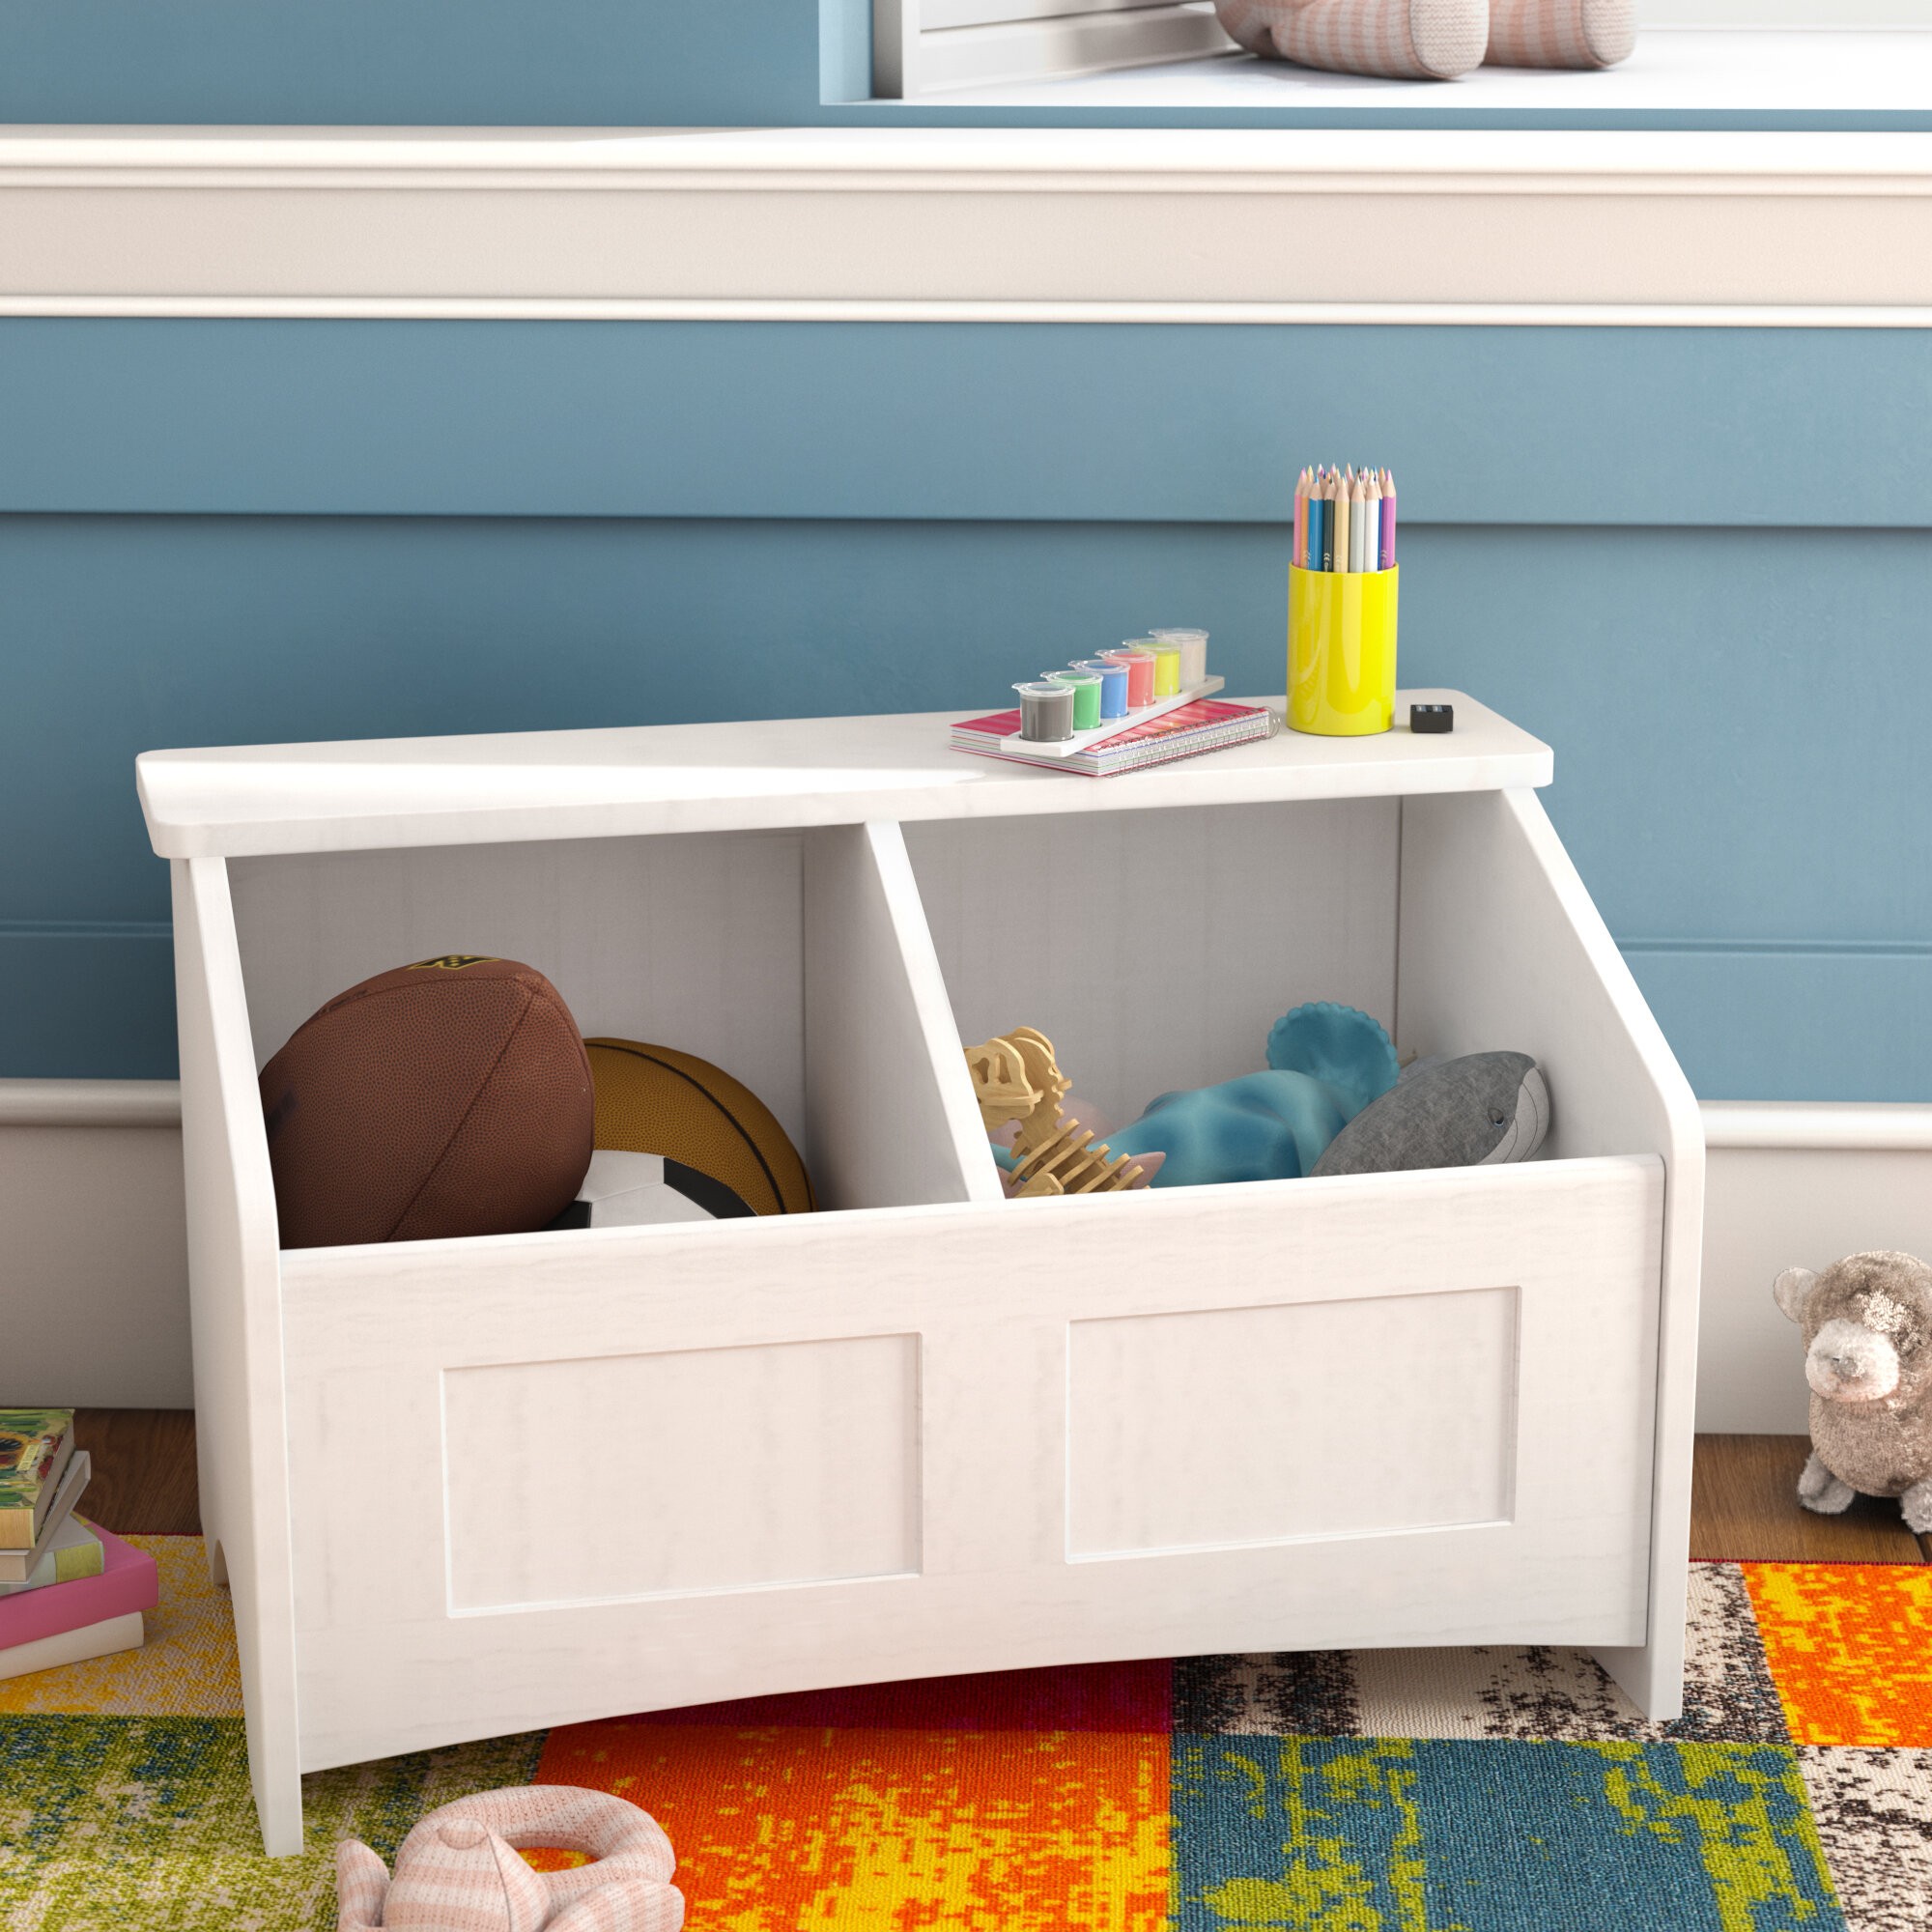 How to build a toy box bench